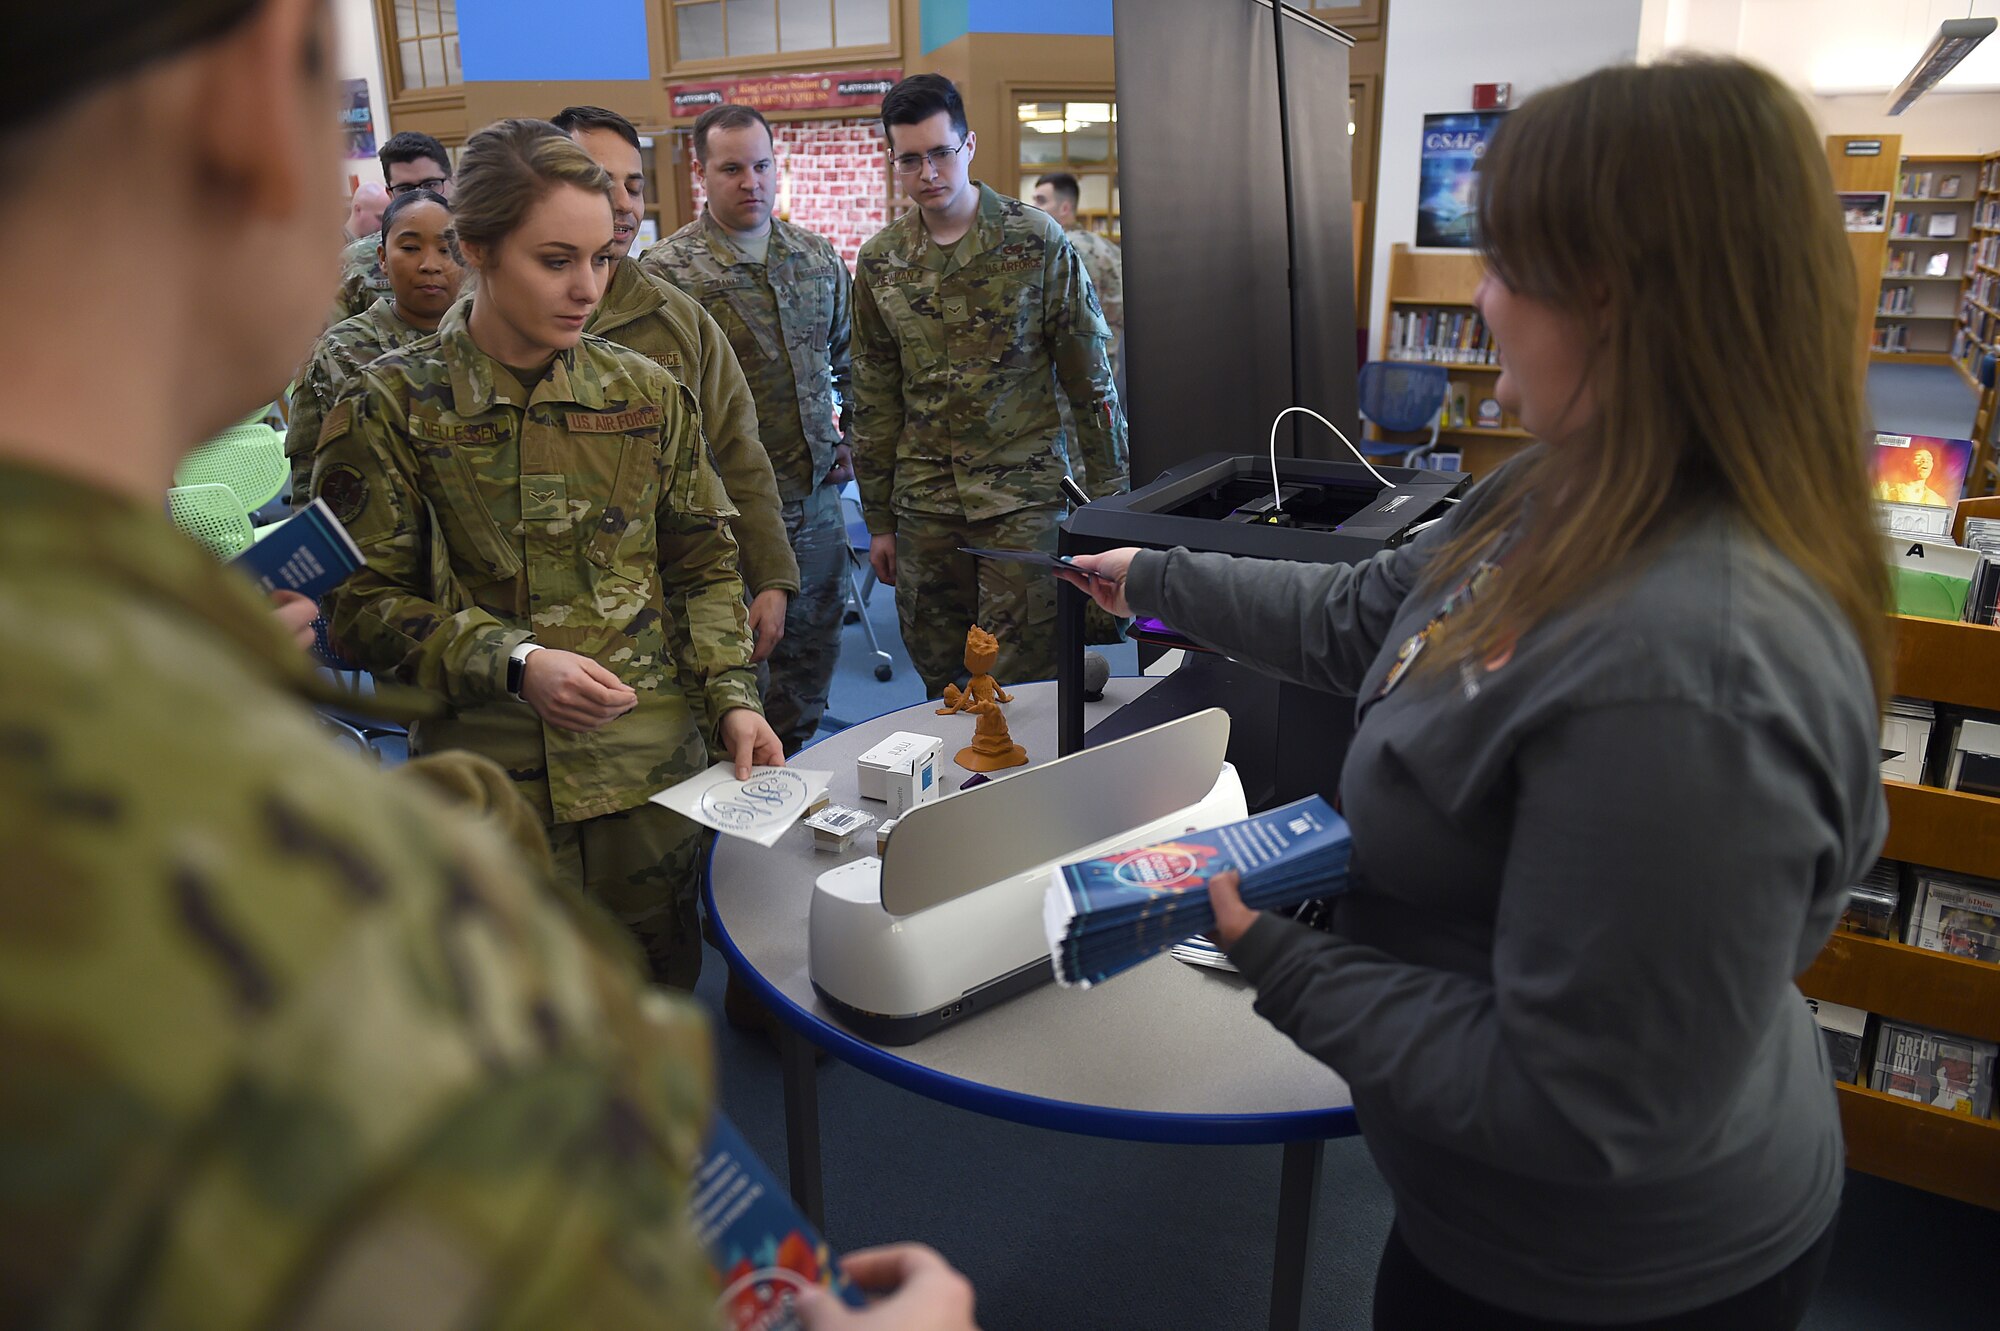 Jessica Muschek, McChord Field Library technician, hands out pamphlets to Airmen participating in Wingman Day as they observe a 3-D printer demonstration at the McChord Field Library, Nov. 15, 2019. Wingman Day offered a variety of classes to Airmen including one on what resources the library offers besides books.